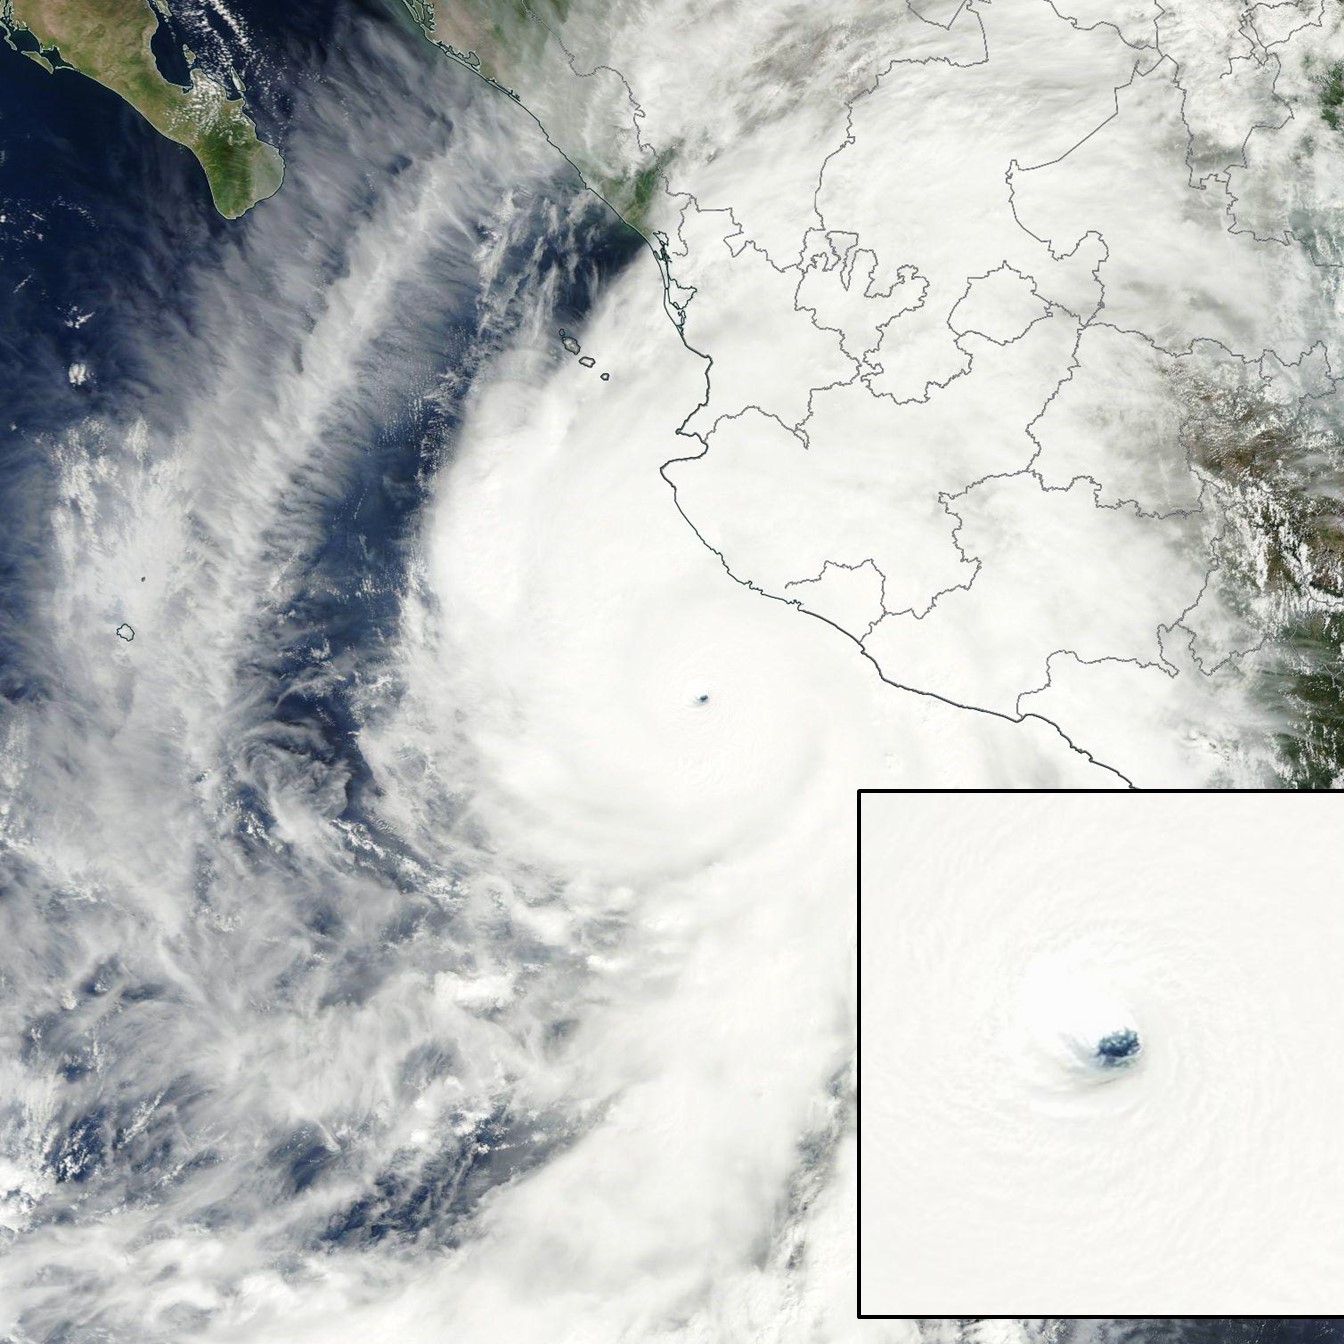 MODIS color imagery of Hurricane Patricia with 190 mph maximum sustained surface winds.